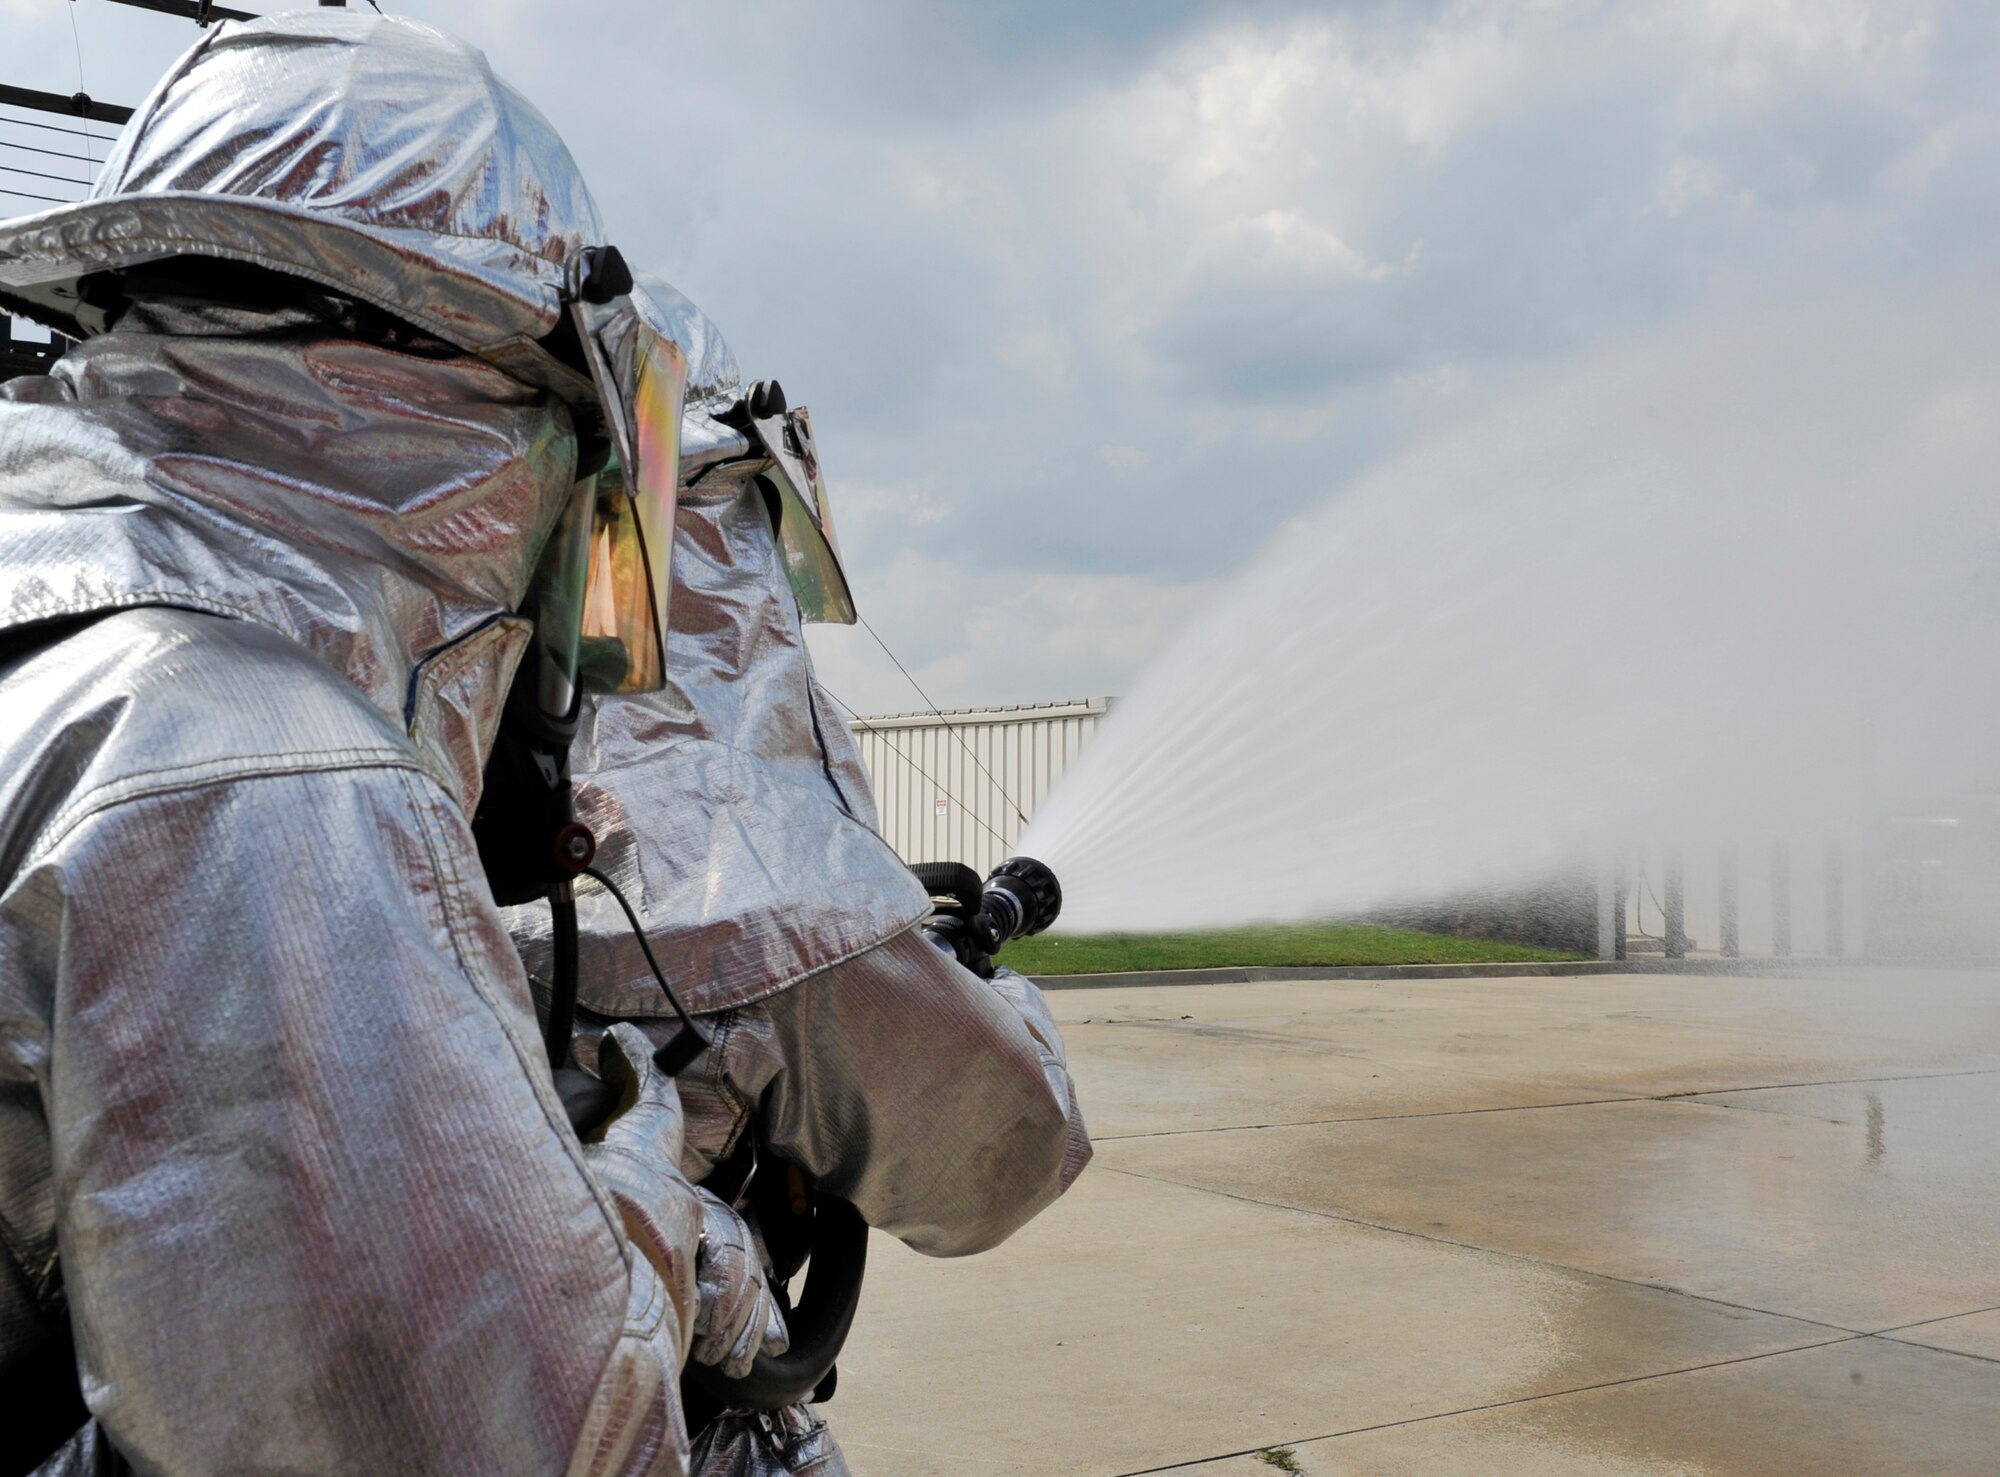 Airman 1st Class Marcus Lamorie (right) and Airman 1st Class Daniel O'Conner, 19th Civil Engineering Squadron fire fighters, simulate extinguishing a fire on the flight line Sept. 21. The P19 crash truck hose can discharge 60 gallons a minute. (U.S. Air Force photo by Airman 1st Class Lausanne Pacheco)